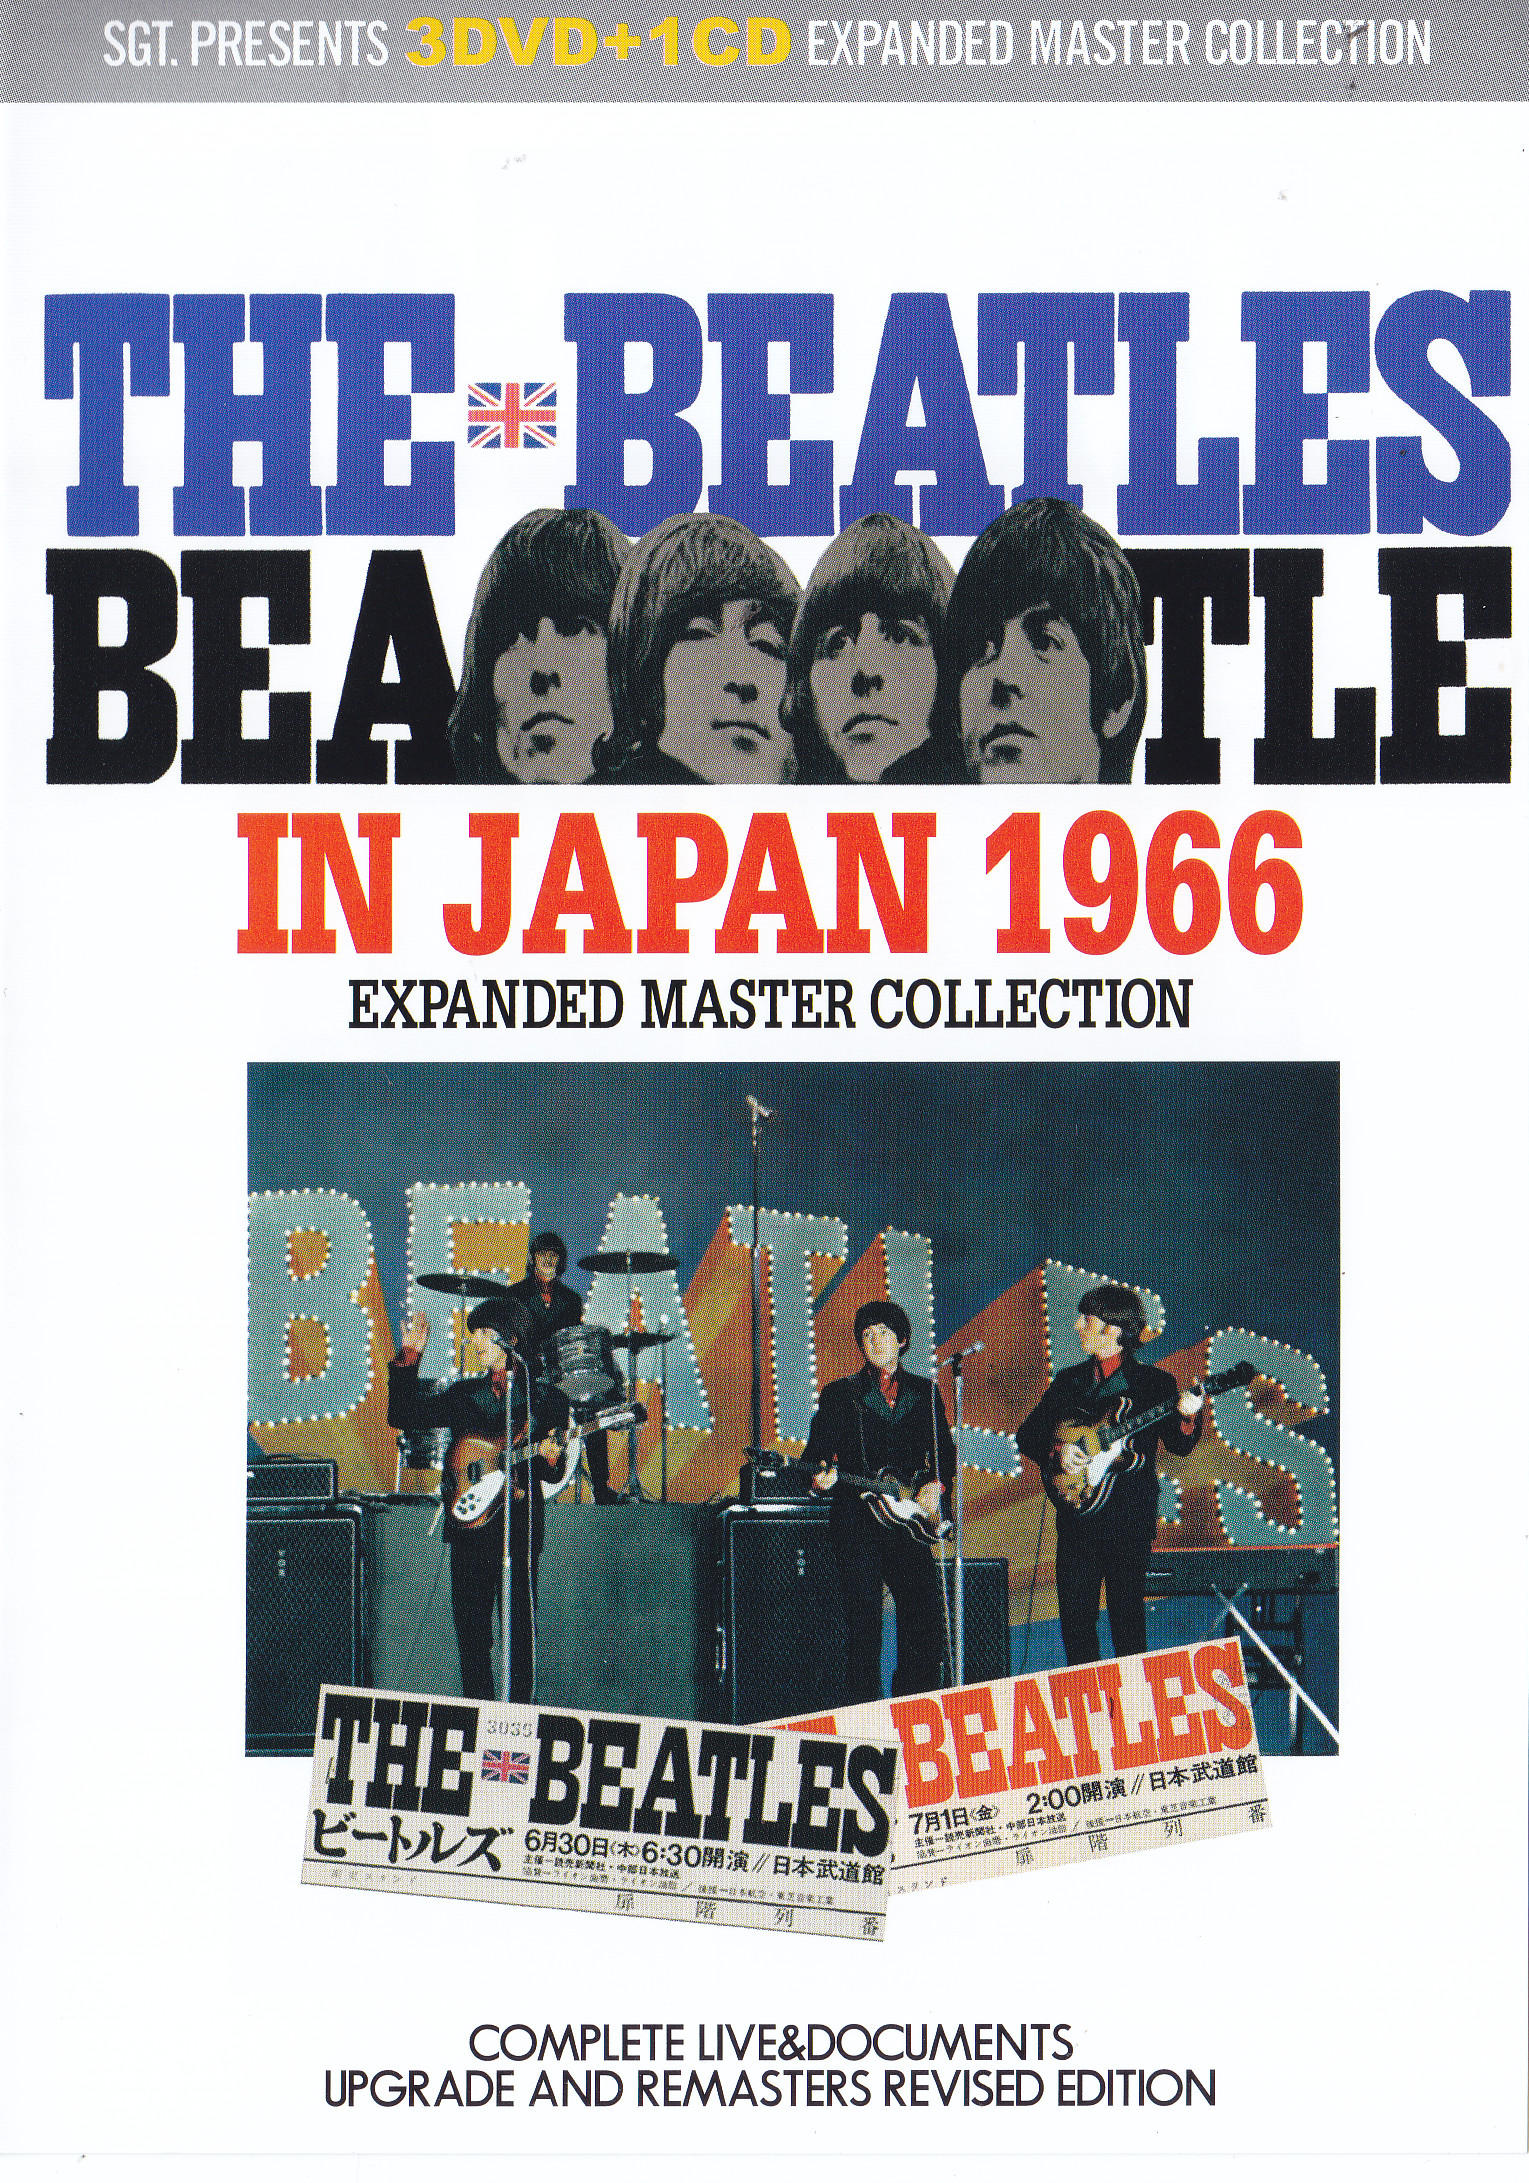 Beatles / In Japan 1966 Expanded Master Collection / 3DVD+1CD